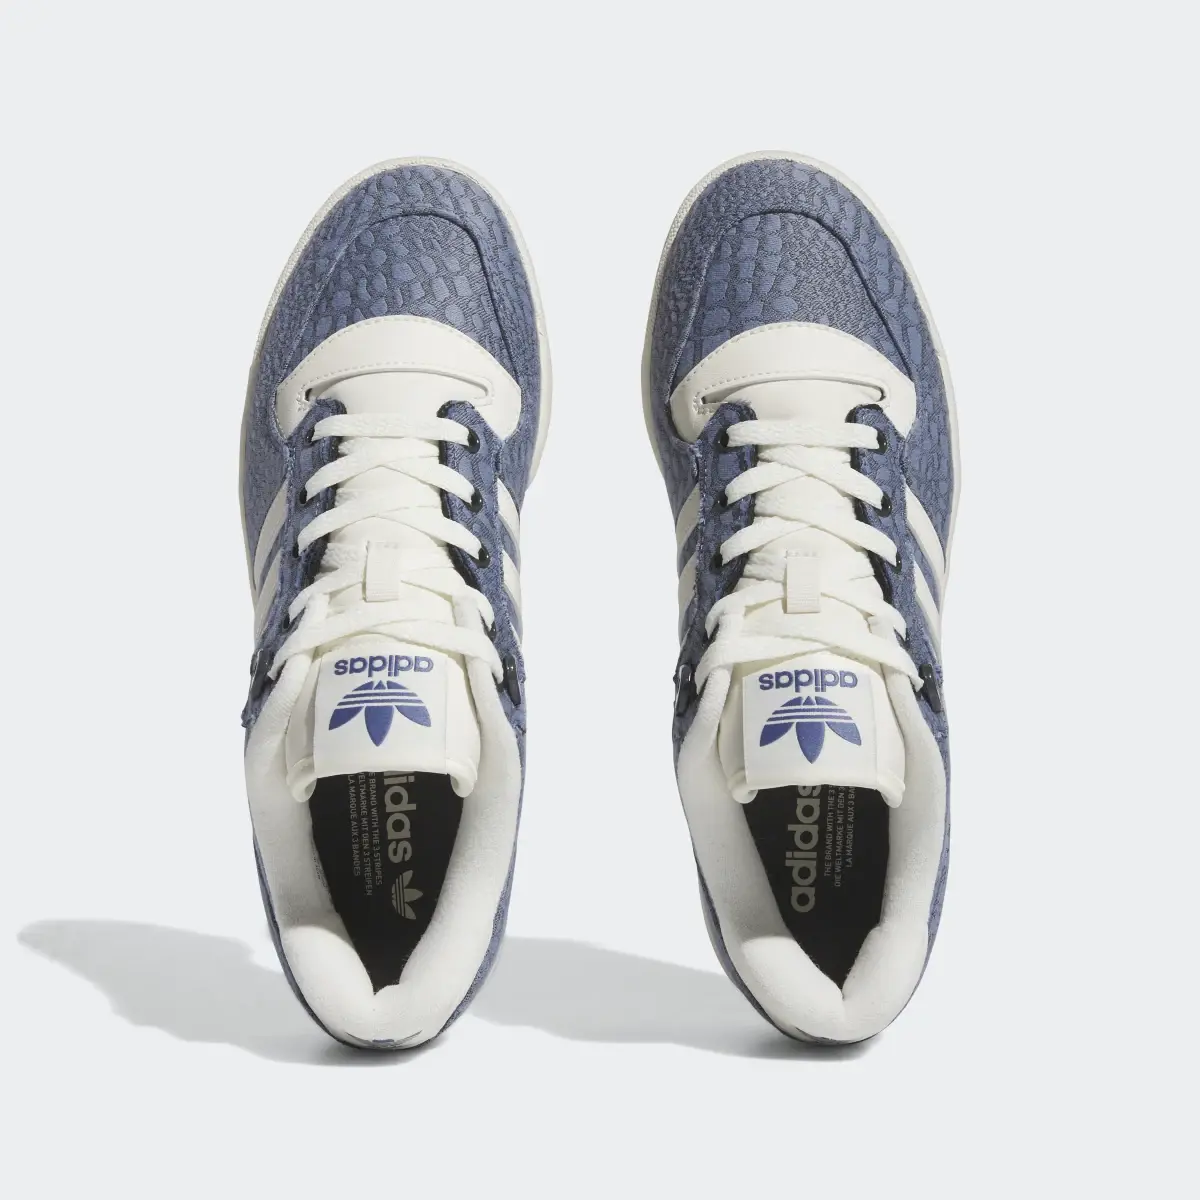 Adidas Rivalry Low Shoes. 3